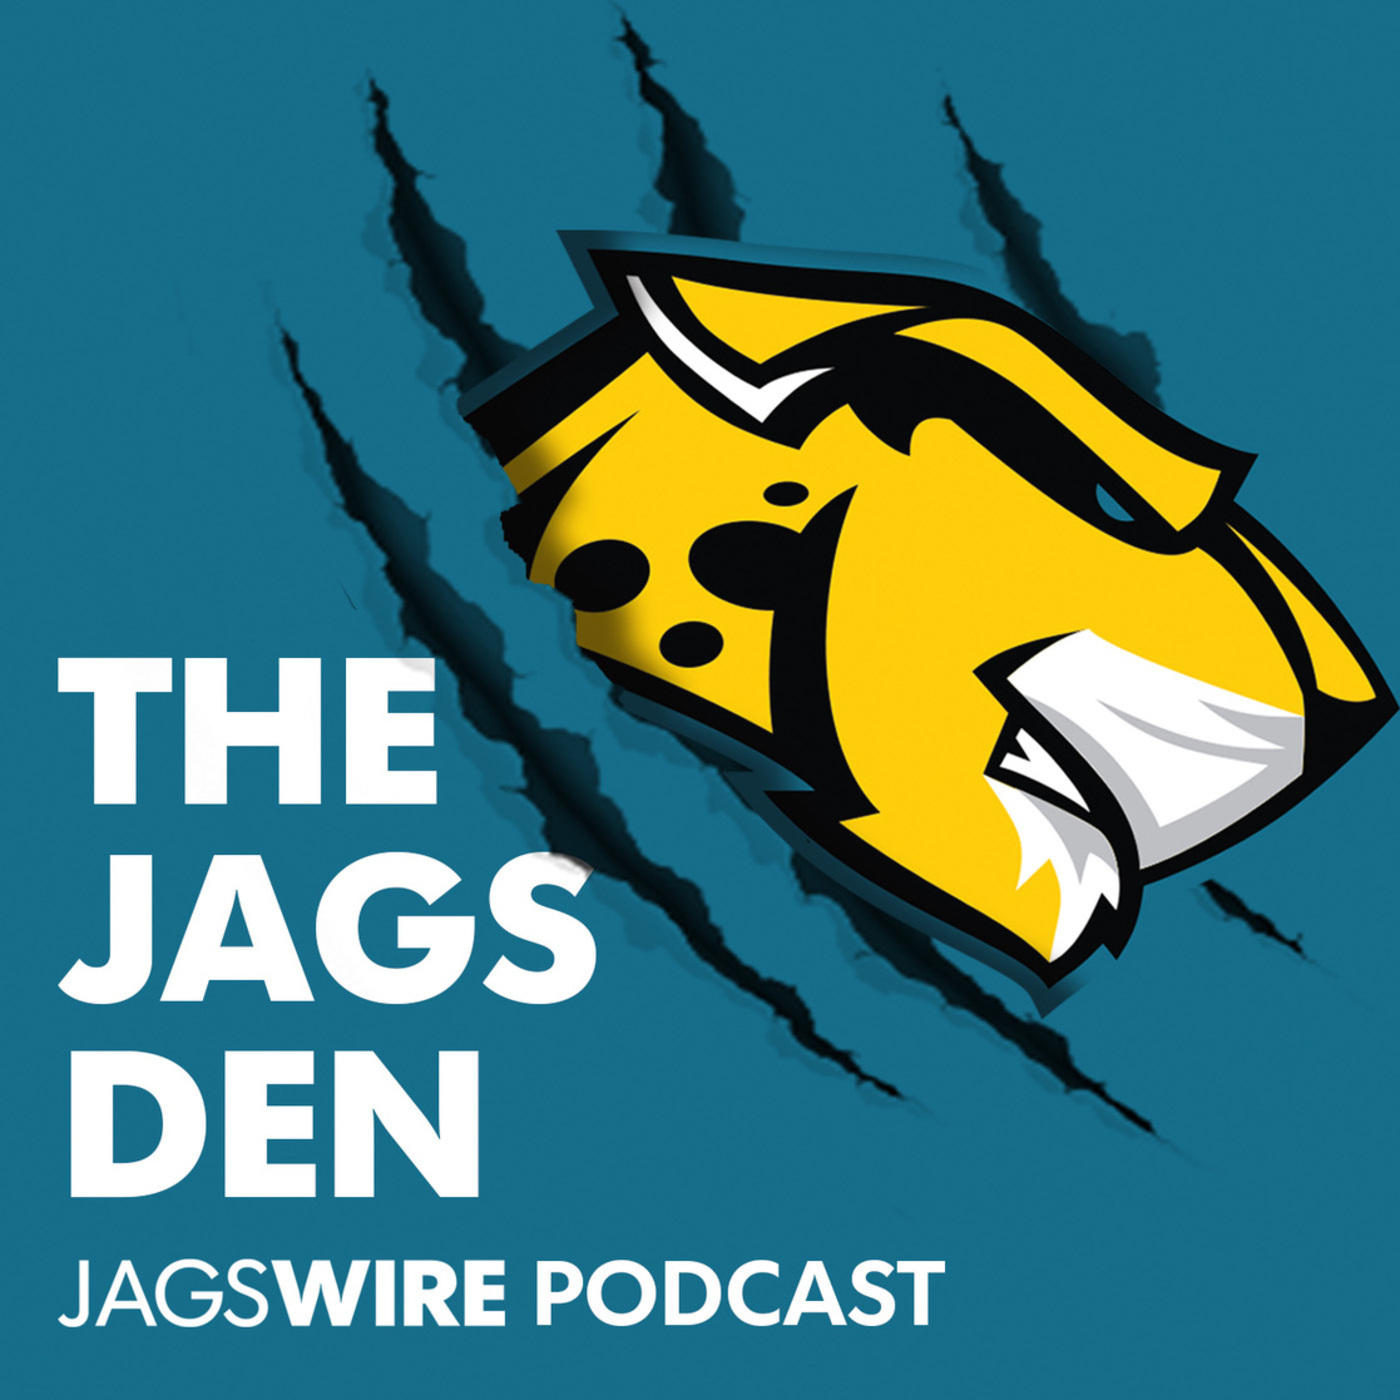 Jags Den Podcast Ep. 33: Discussions on the Jags bringing back their 2018 regime, draft position for 2019, loss to HOU and more